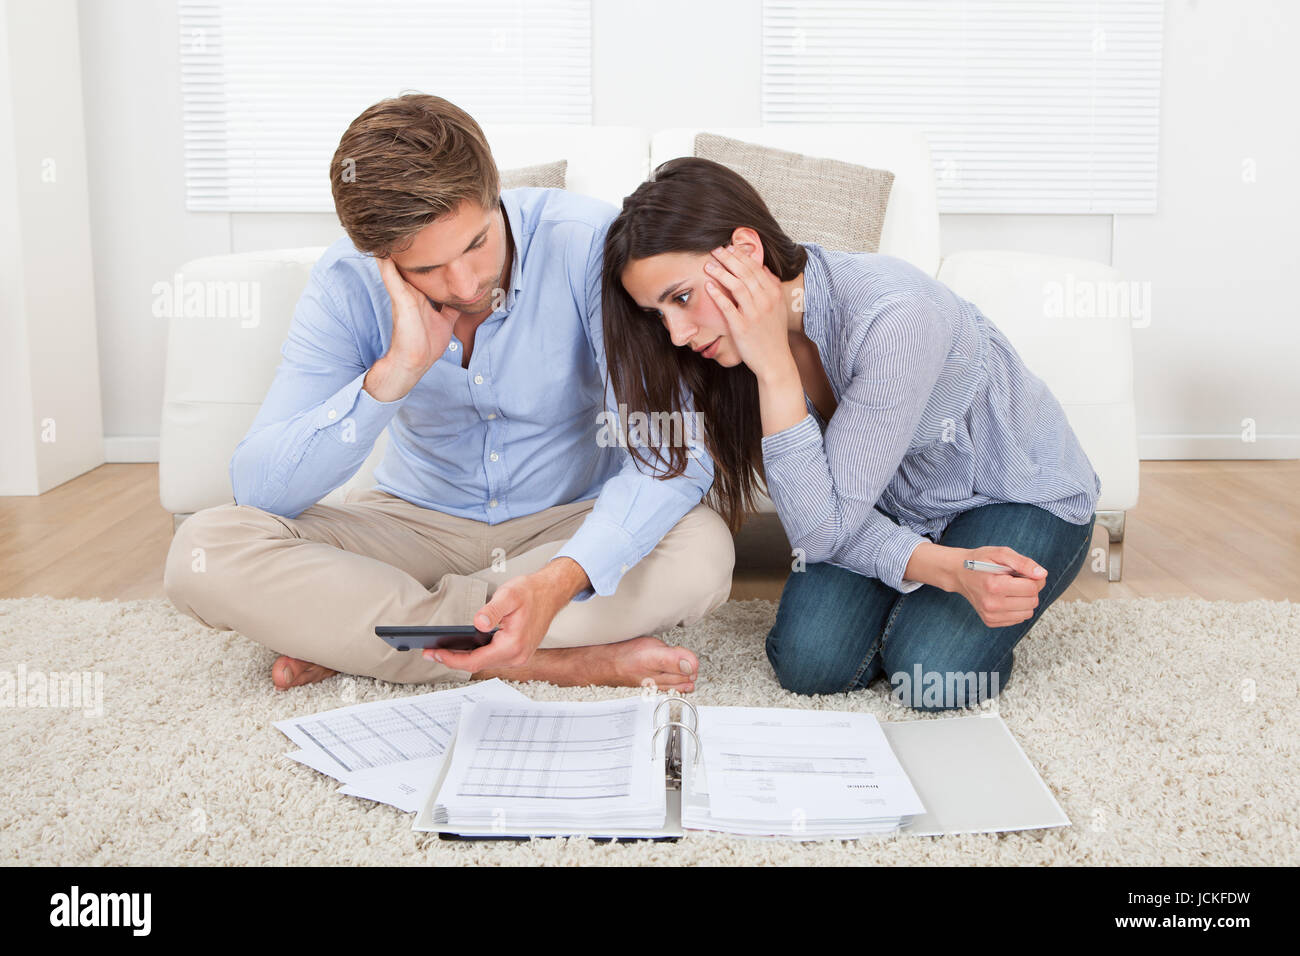 Unhappy young couple in financial trouble at home Stock Photo